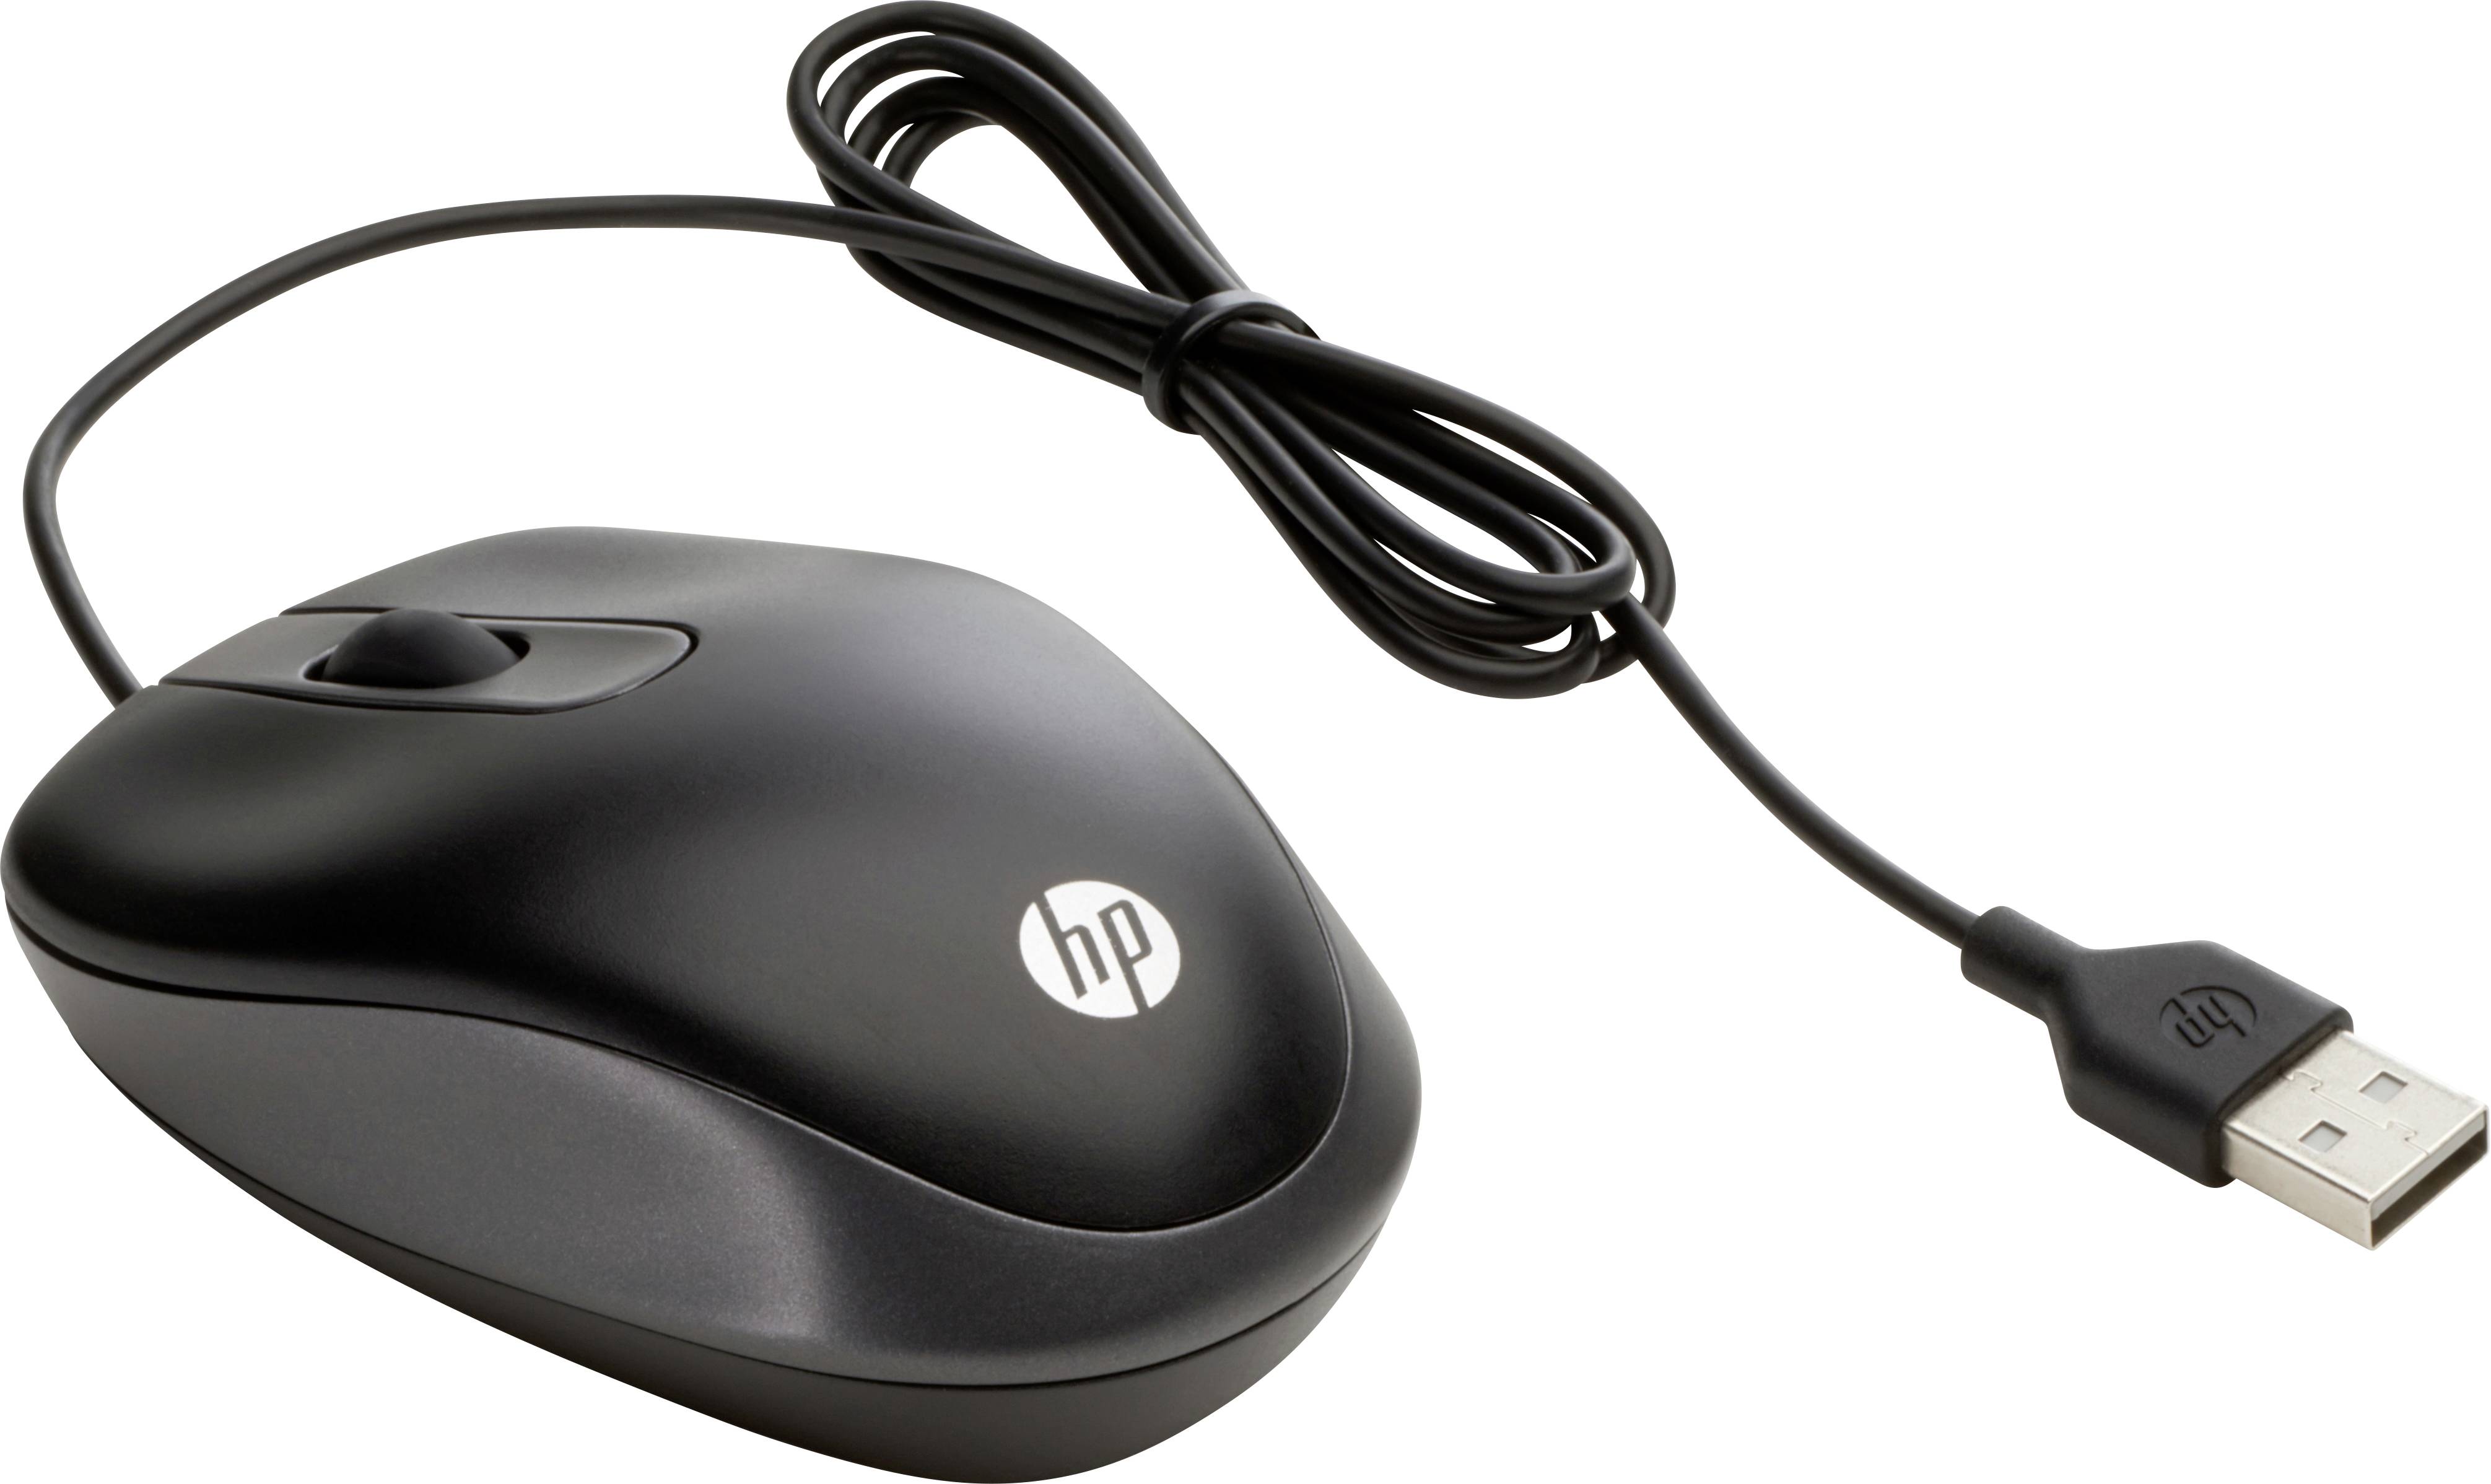 hp travel mouse g1k28aa